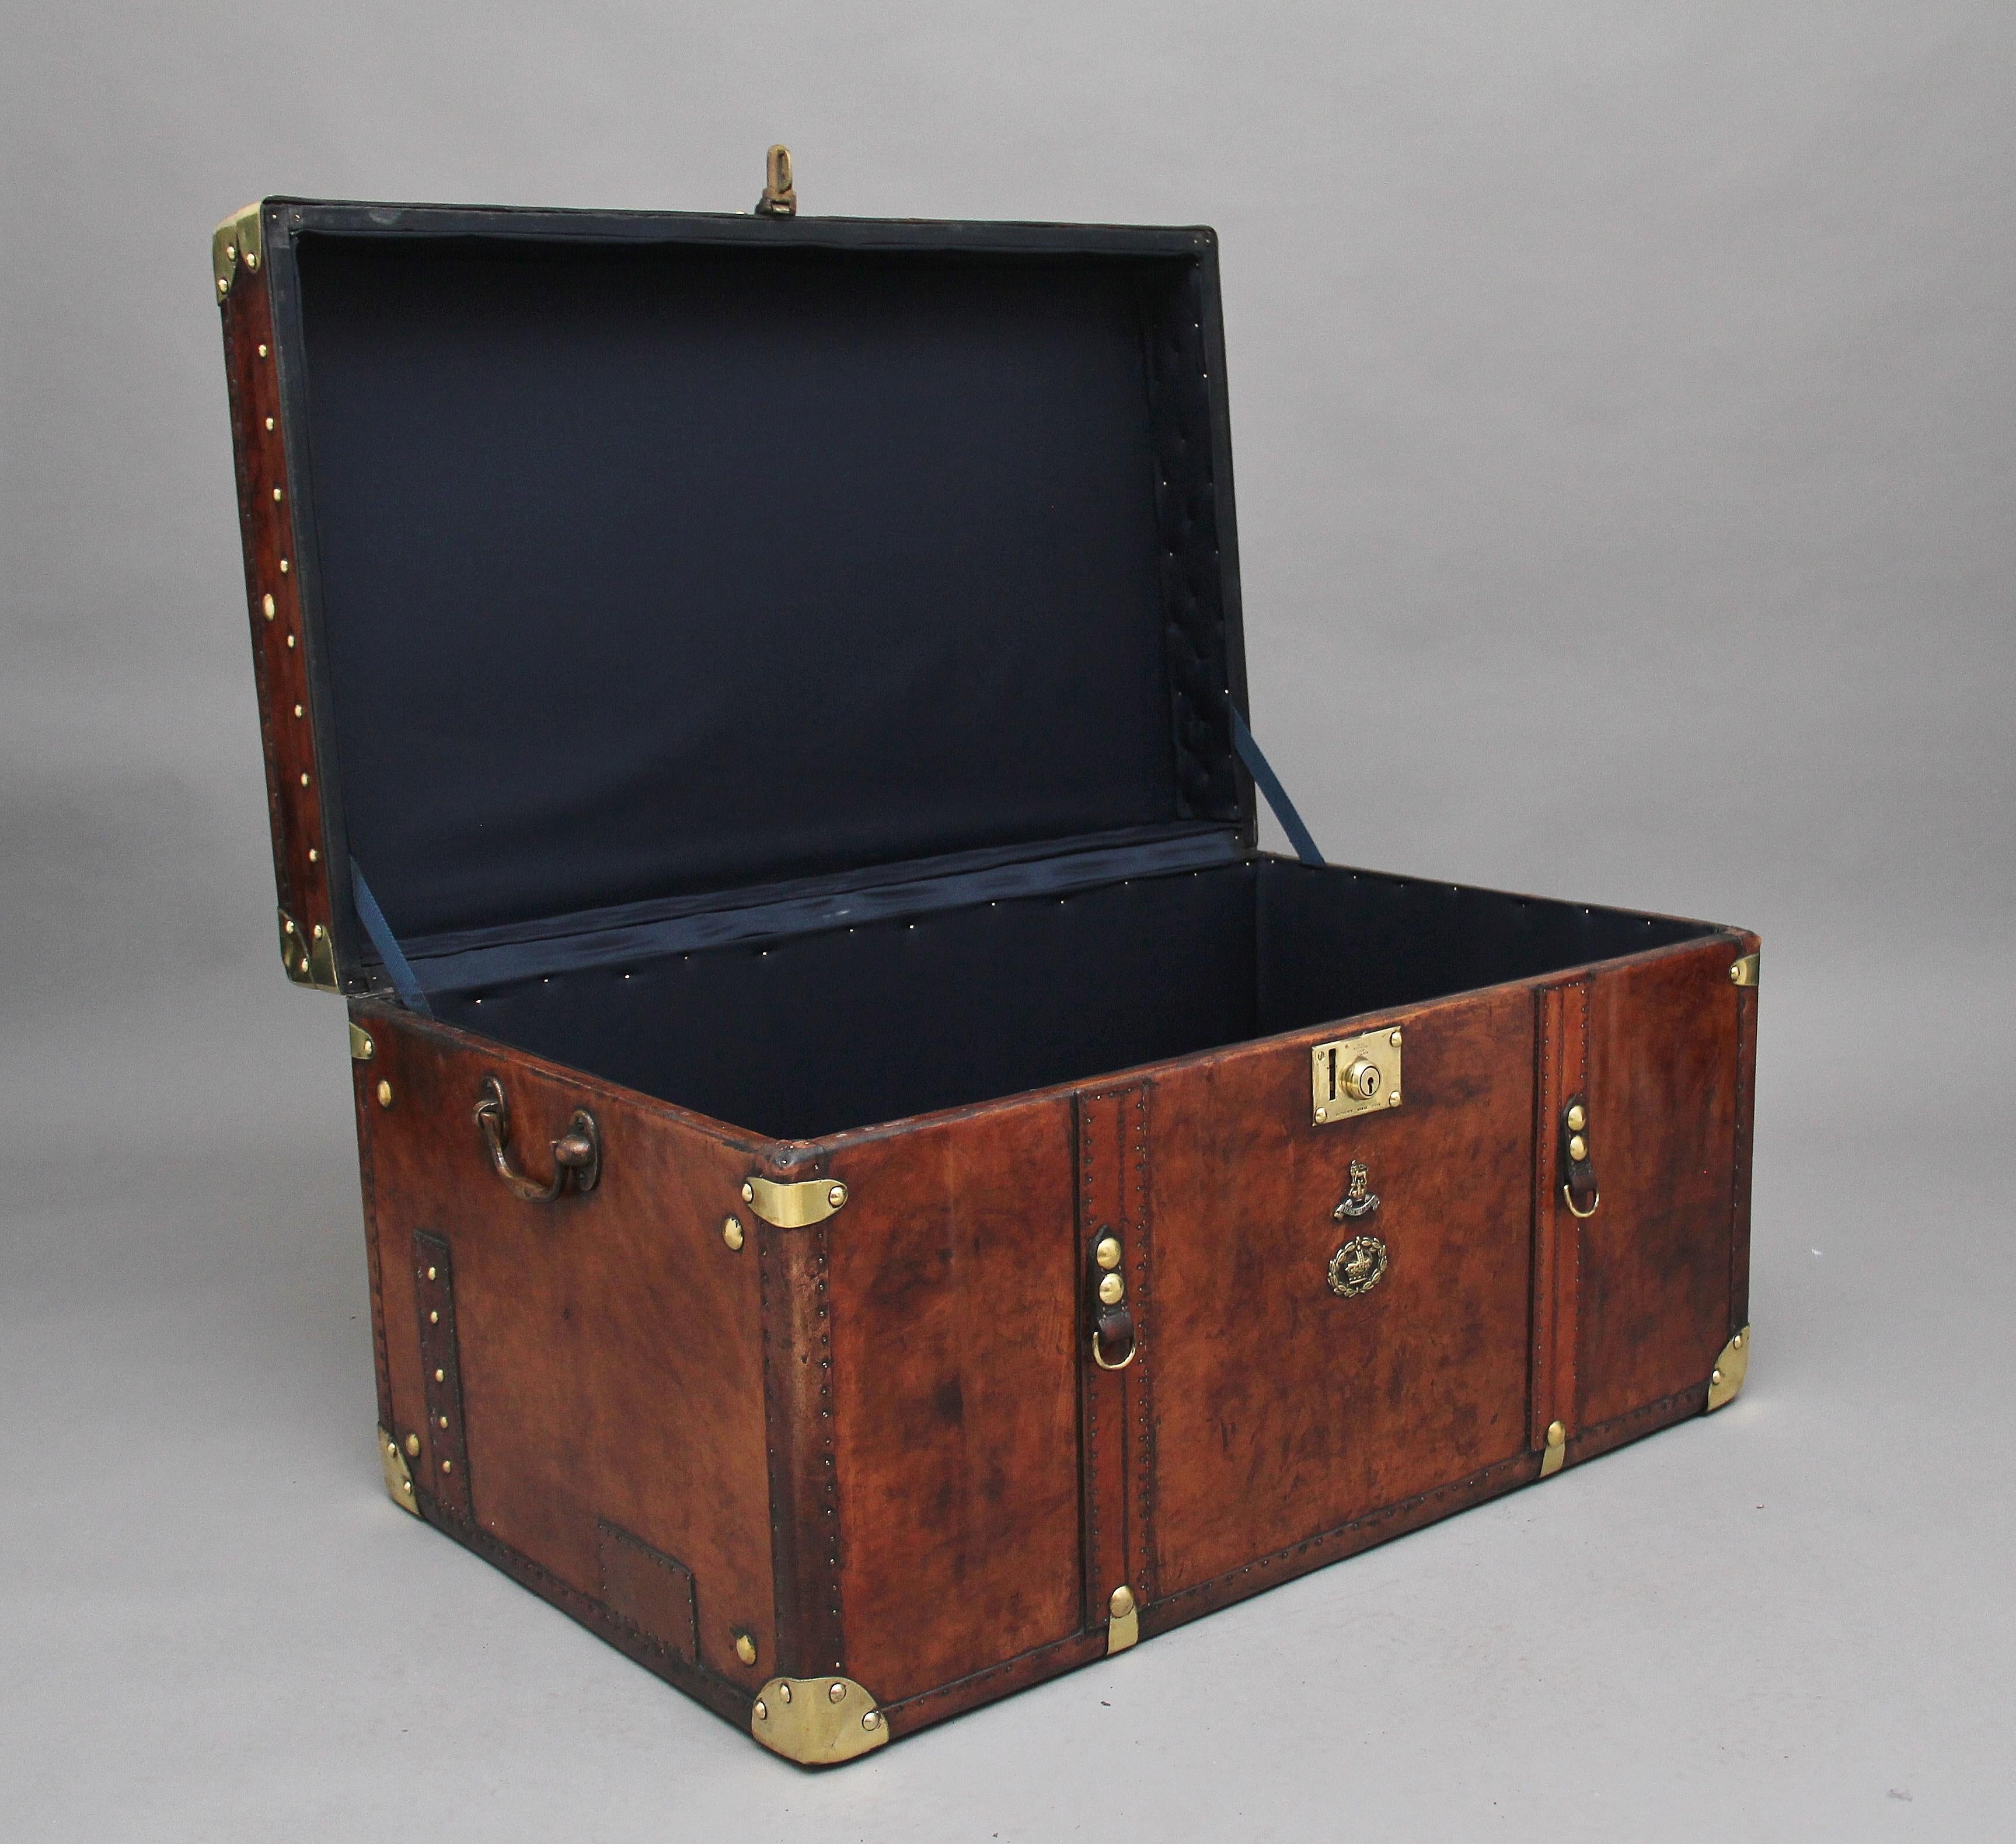 A large early 20th century leather bound ex-army trunk with brass straps and corners, copper studs and brass carrying handles on the sides, the trunk opens to reveal a nice dark blue lined interior, on the front of the trunk there are the regimental